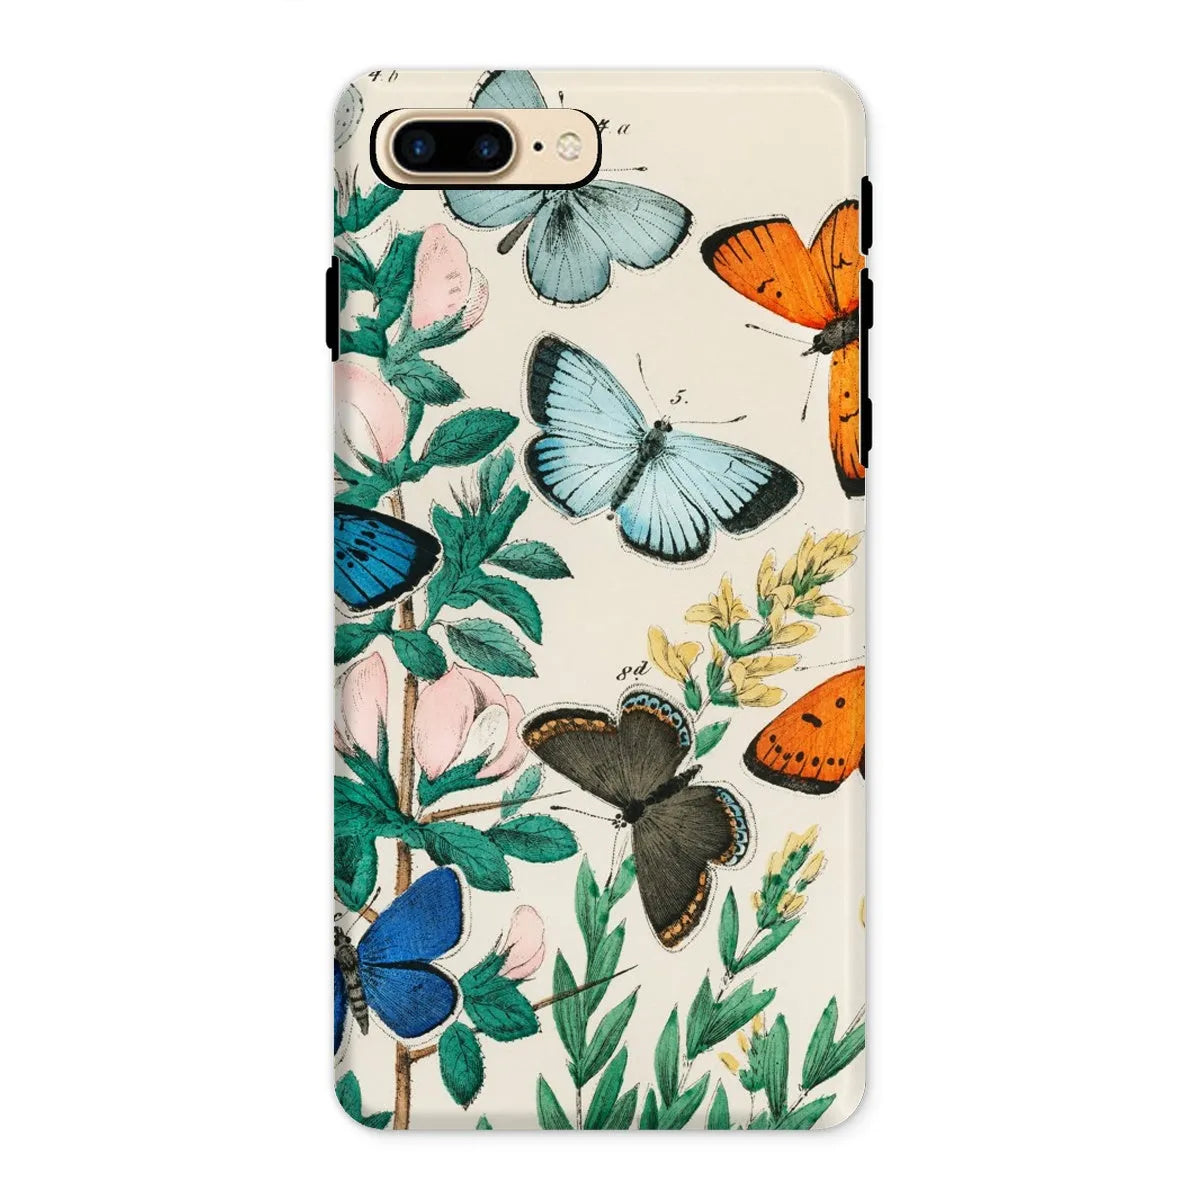 Another Butterfly Aesthetic Art Phone Case - William Forsell Kirby - Iphone 8 Plus / Matte - Mobile Phone Cases